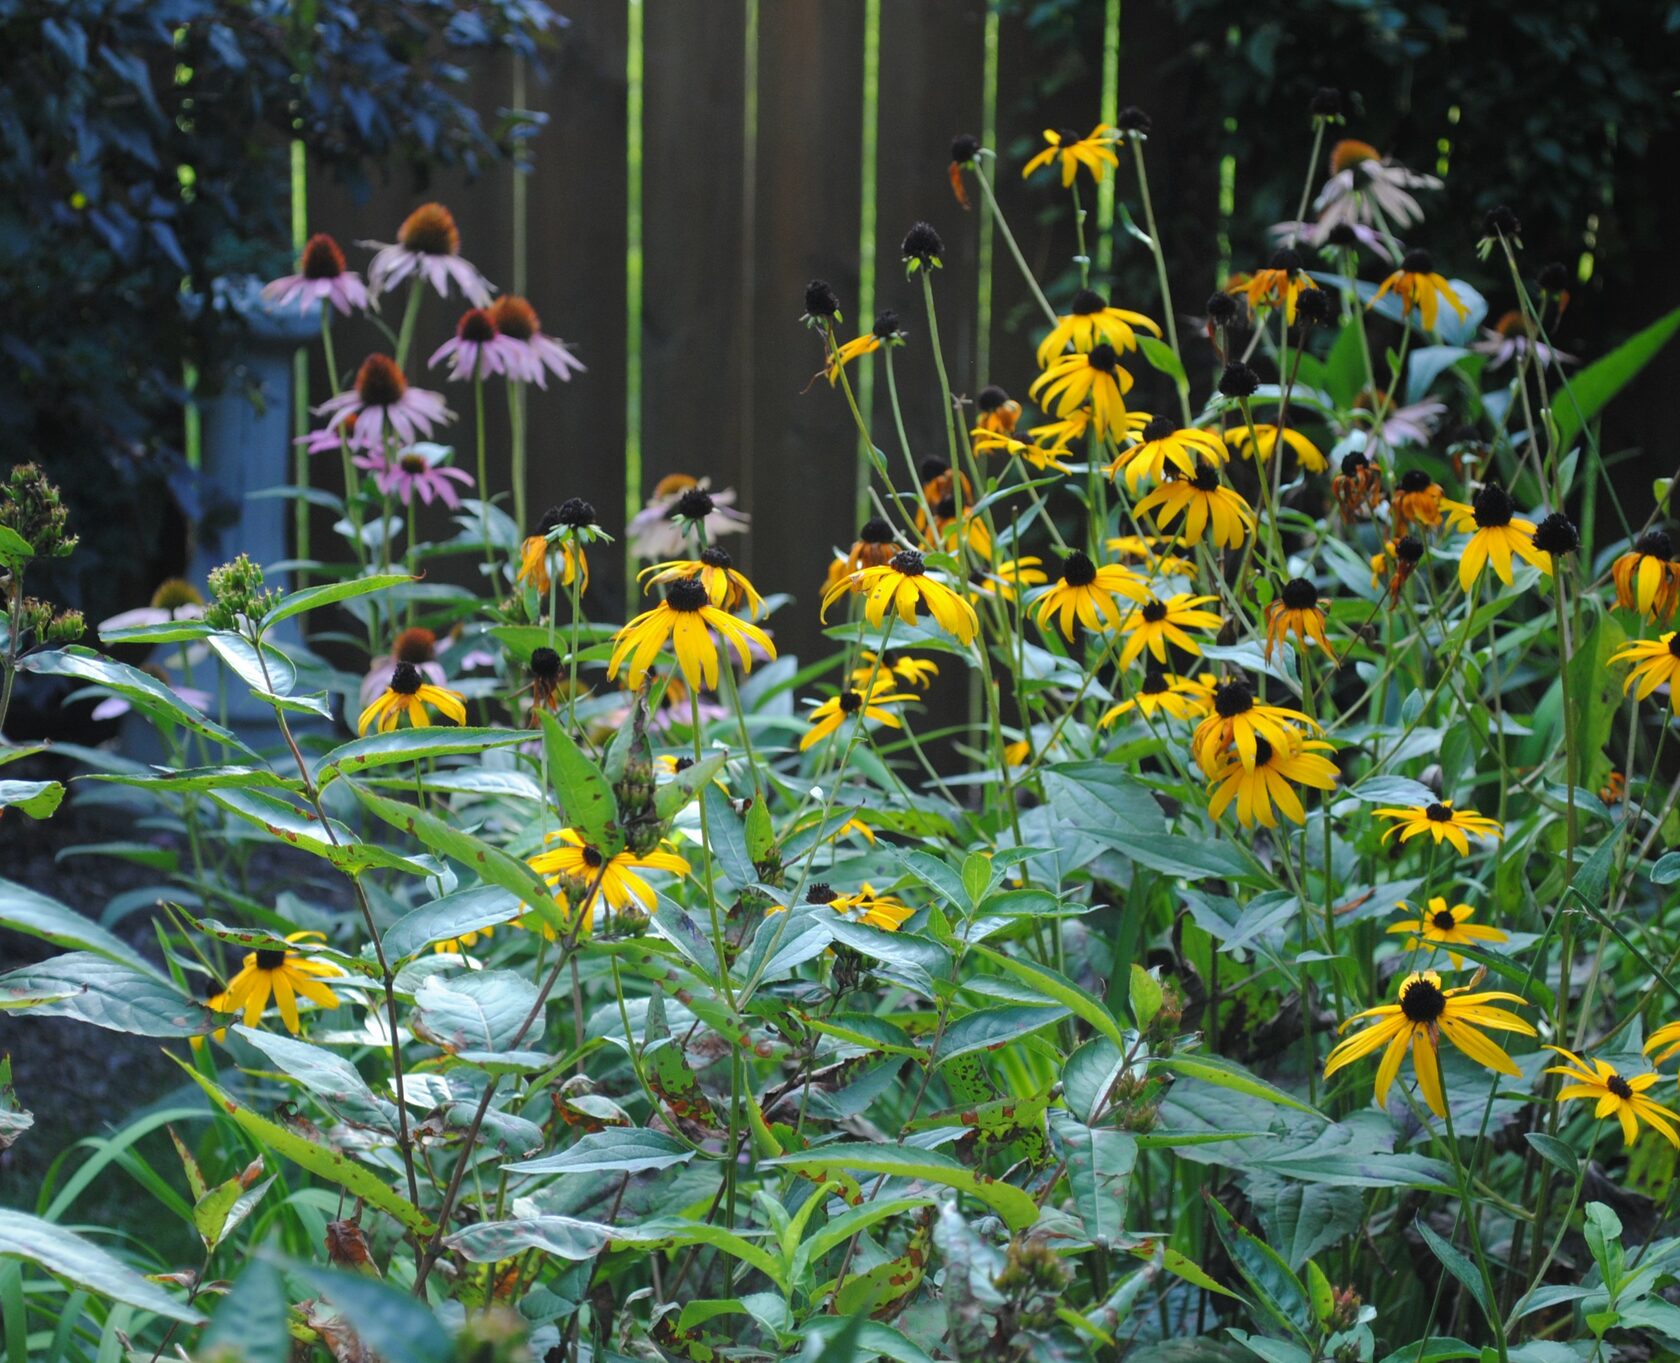 A variety of flowers and plants in the foreground, and a wooden fence out of focus in the background.